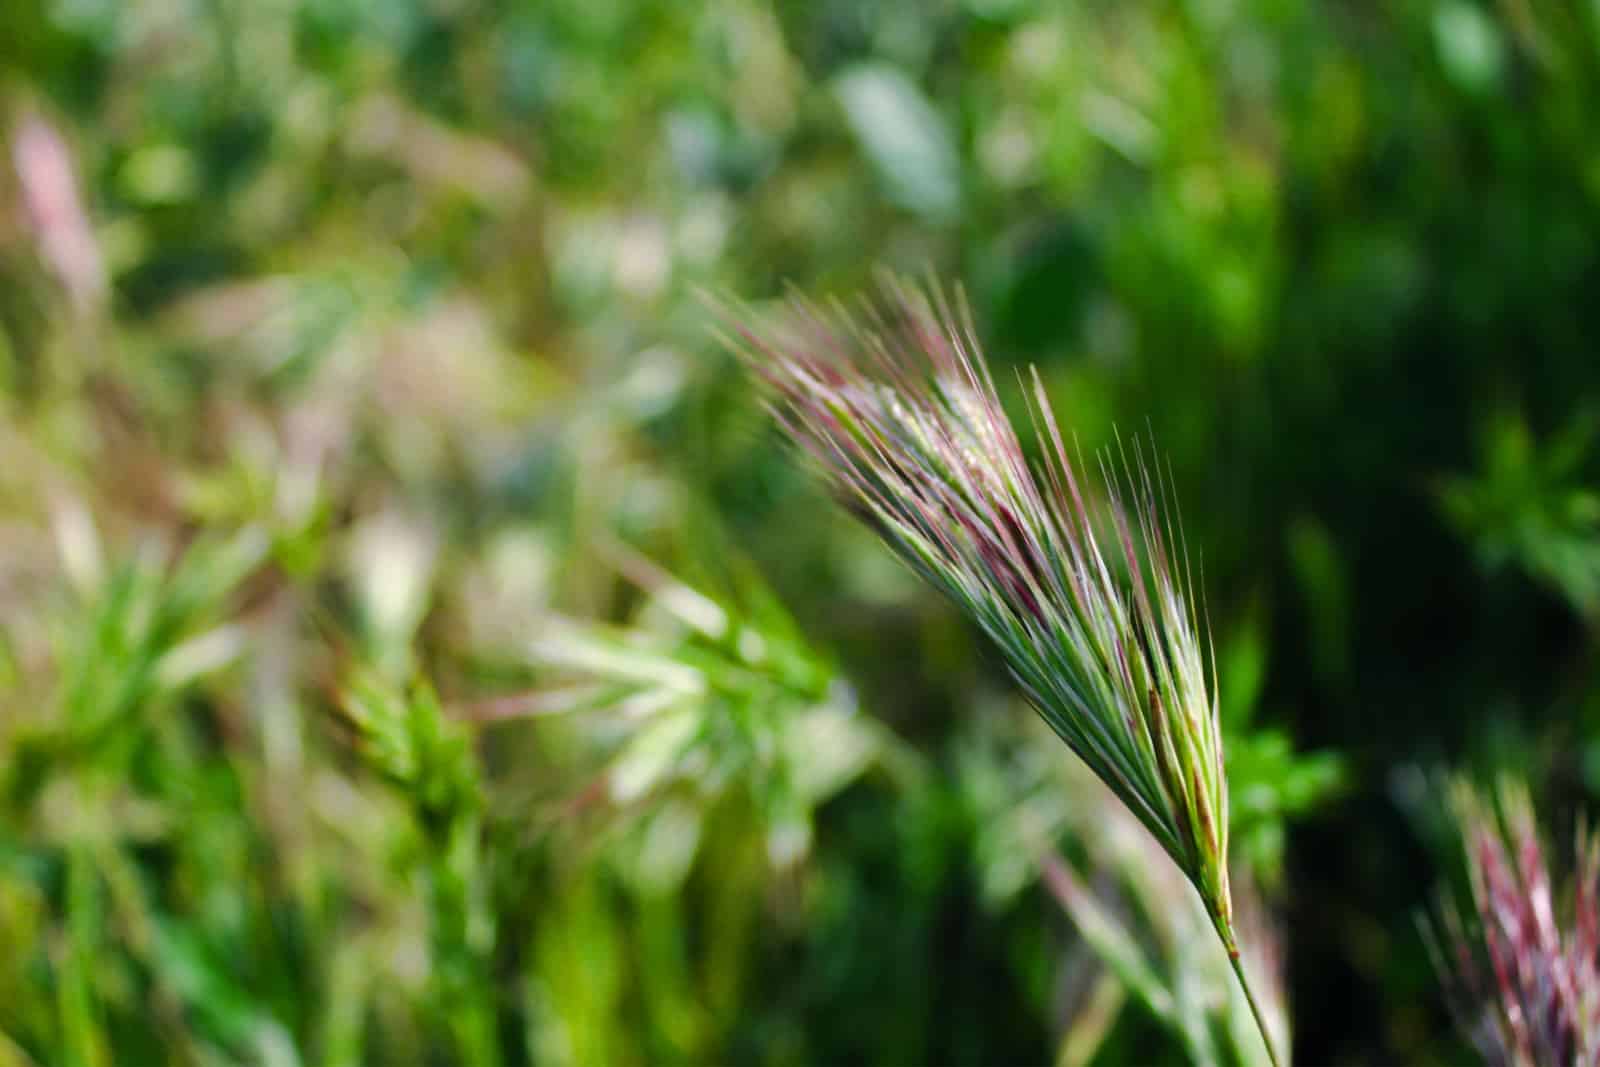 Flower of the Chinese silver grass.